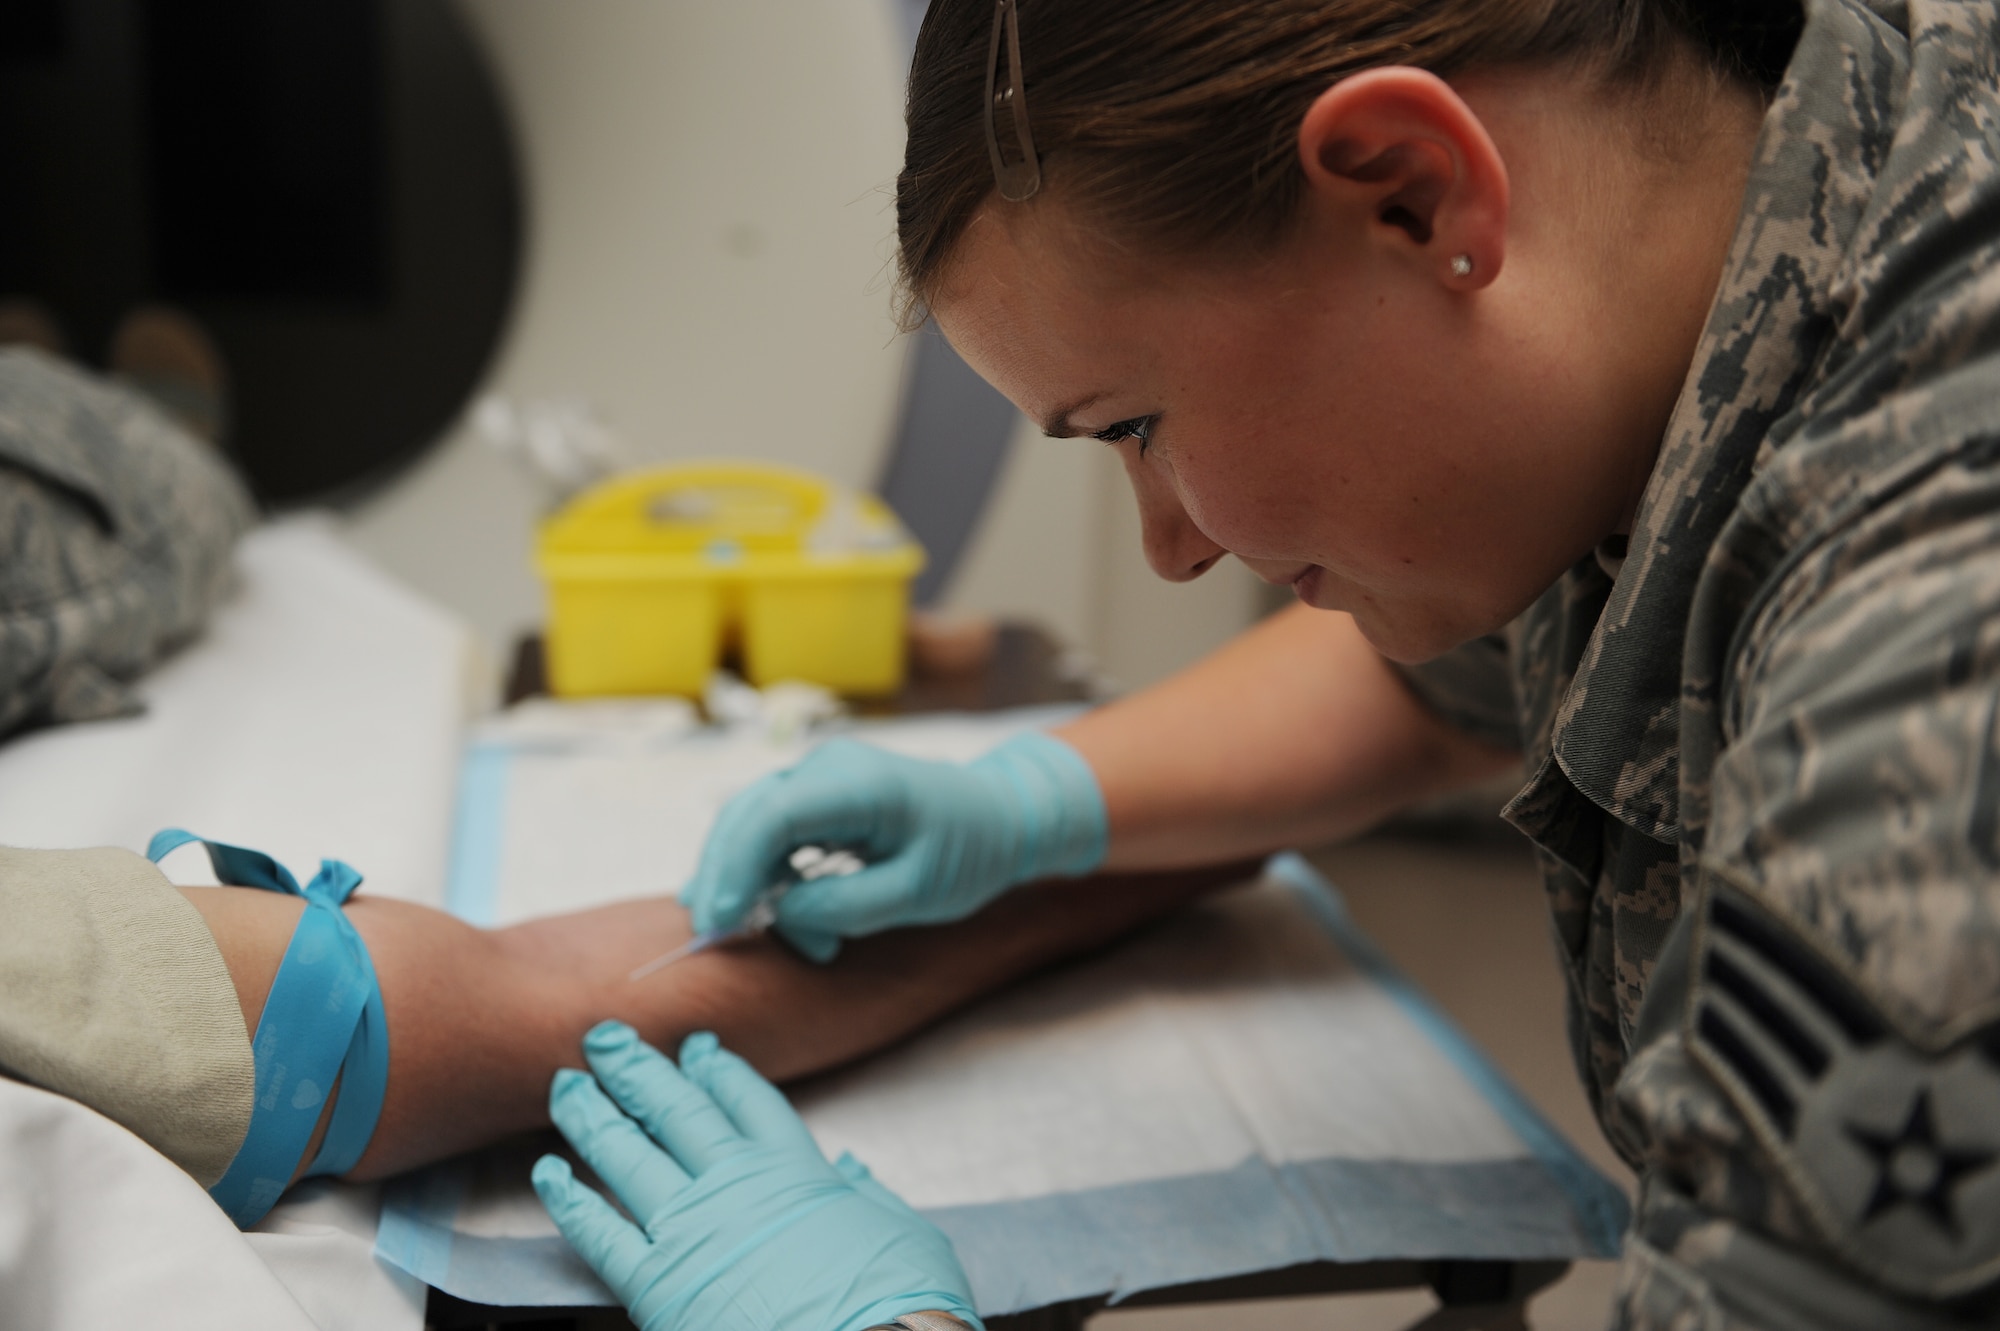 Senior Airman Casey Burch prepares to insert an IV into a patient before going into the CT scan at Scott Air Force Base, Ill., June 3, 2014.  The IV delivers the contrast into the patient’s veins in order to highlight certain areas on the body when it is scanned, which makes it easier for the radiologist to see.  Burch is a 375th Medical Support Squadron radiology technologist.  (U.S. Air Force photo by Staff Sgt. Maria Bowman)